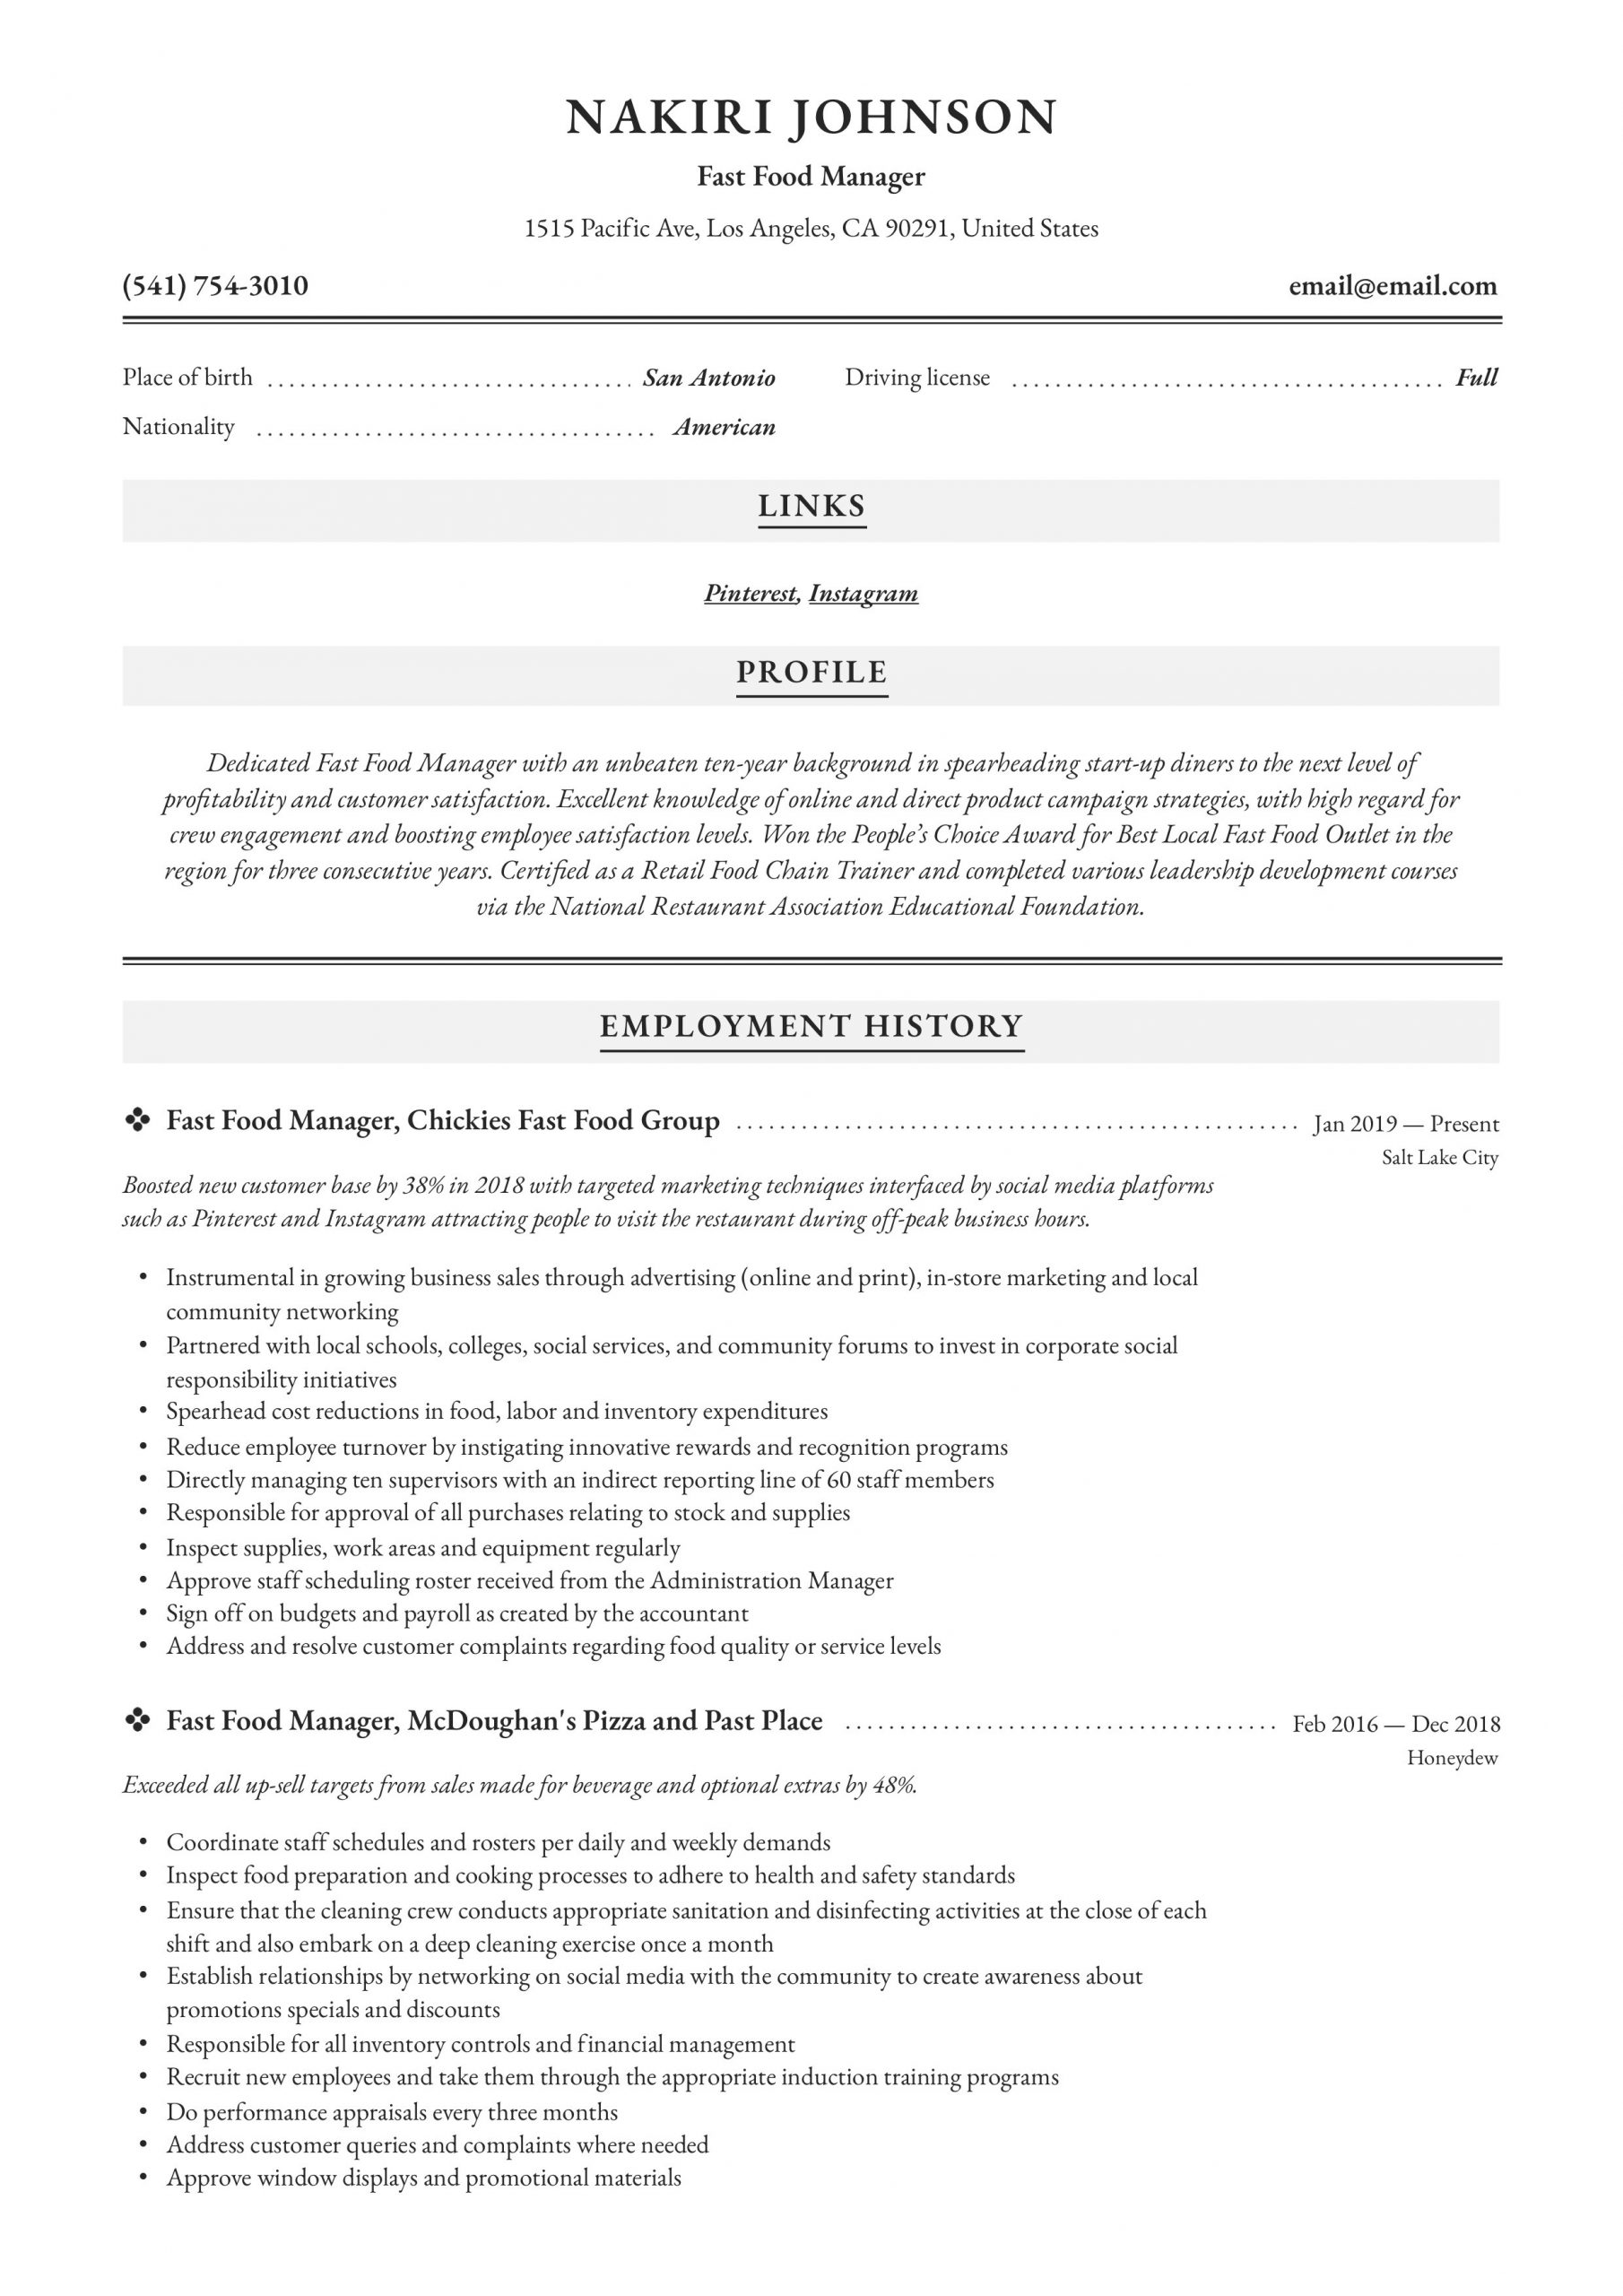 Sample Resume for Restaurant Manager Position Fast Food Manager Resume & Writing Guide  12 Examples 2020